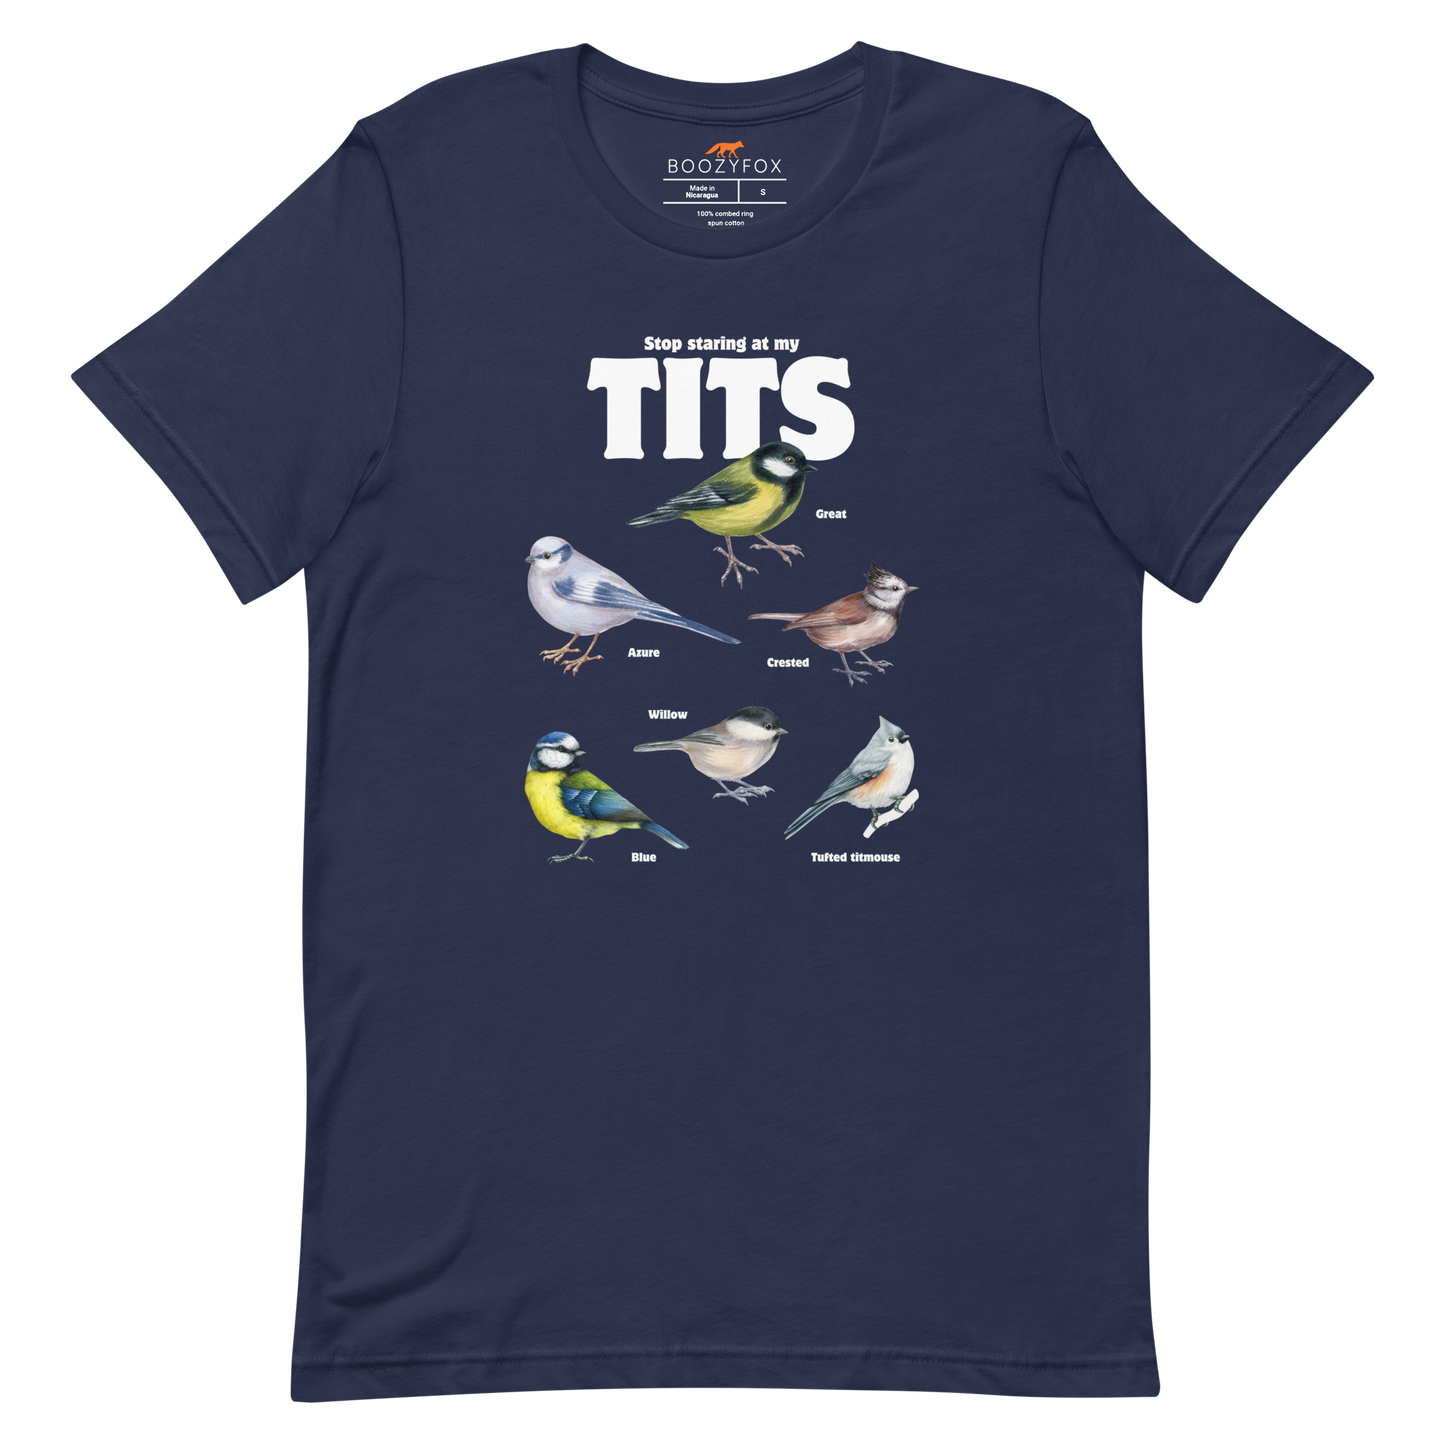 Navy Premium Tit Tee featuring a funny Stop Staring At My Tits graphic on the chest - Funny Graphic Tit Bird Tees - Boozy Fox